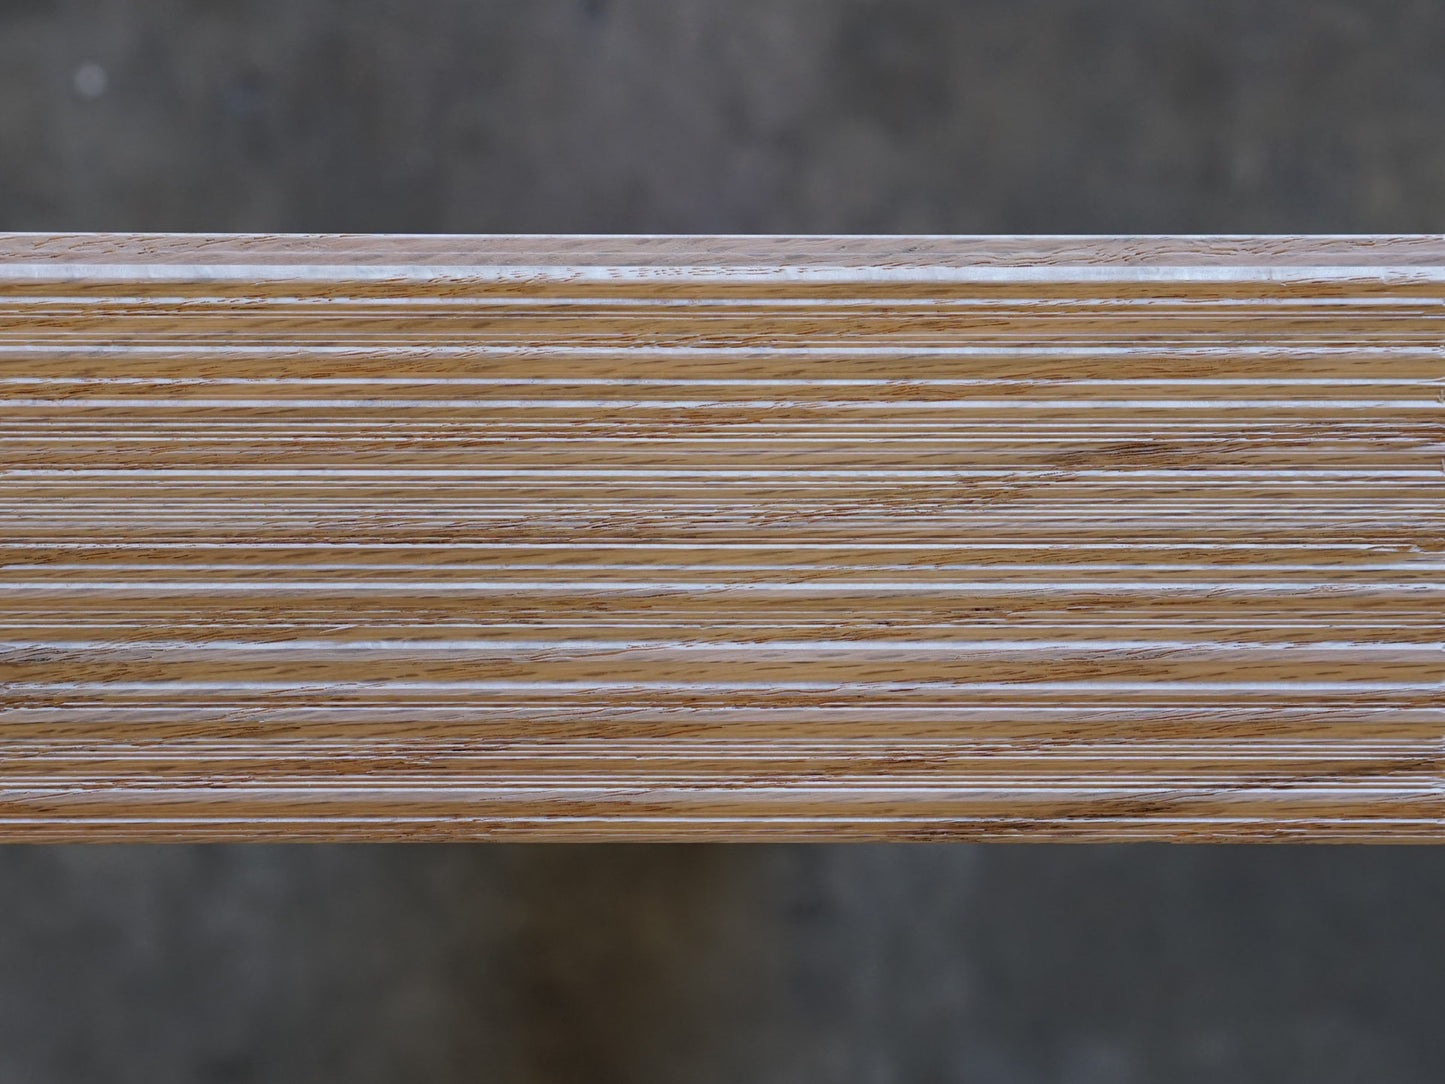 Top down of Weldtex tongue & groove red oak hardwood plank consisting of a combed, striated, brushed wood appearance common in mid-century modern homes and design